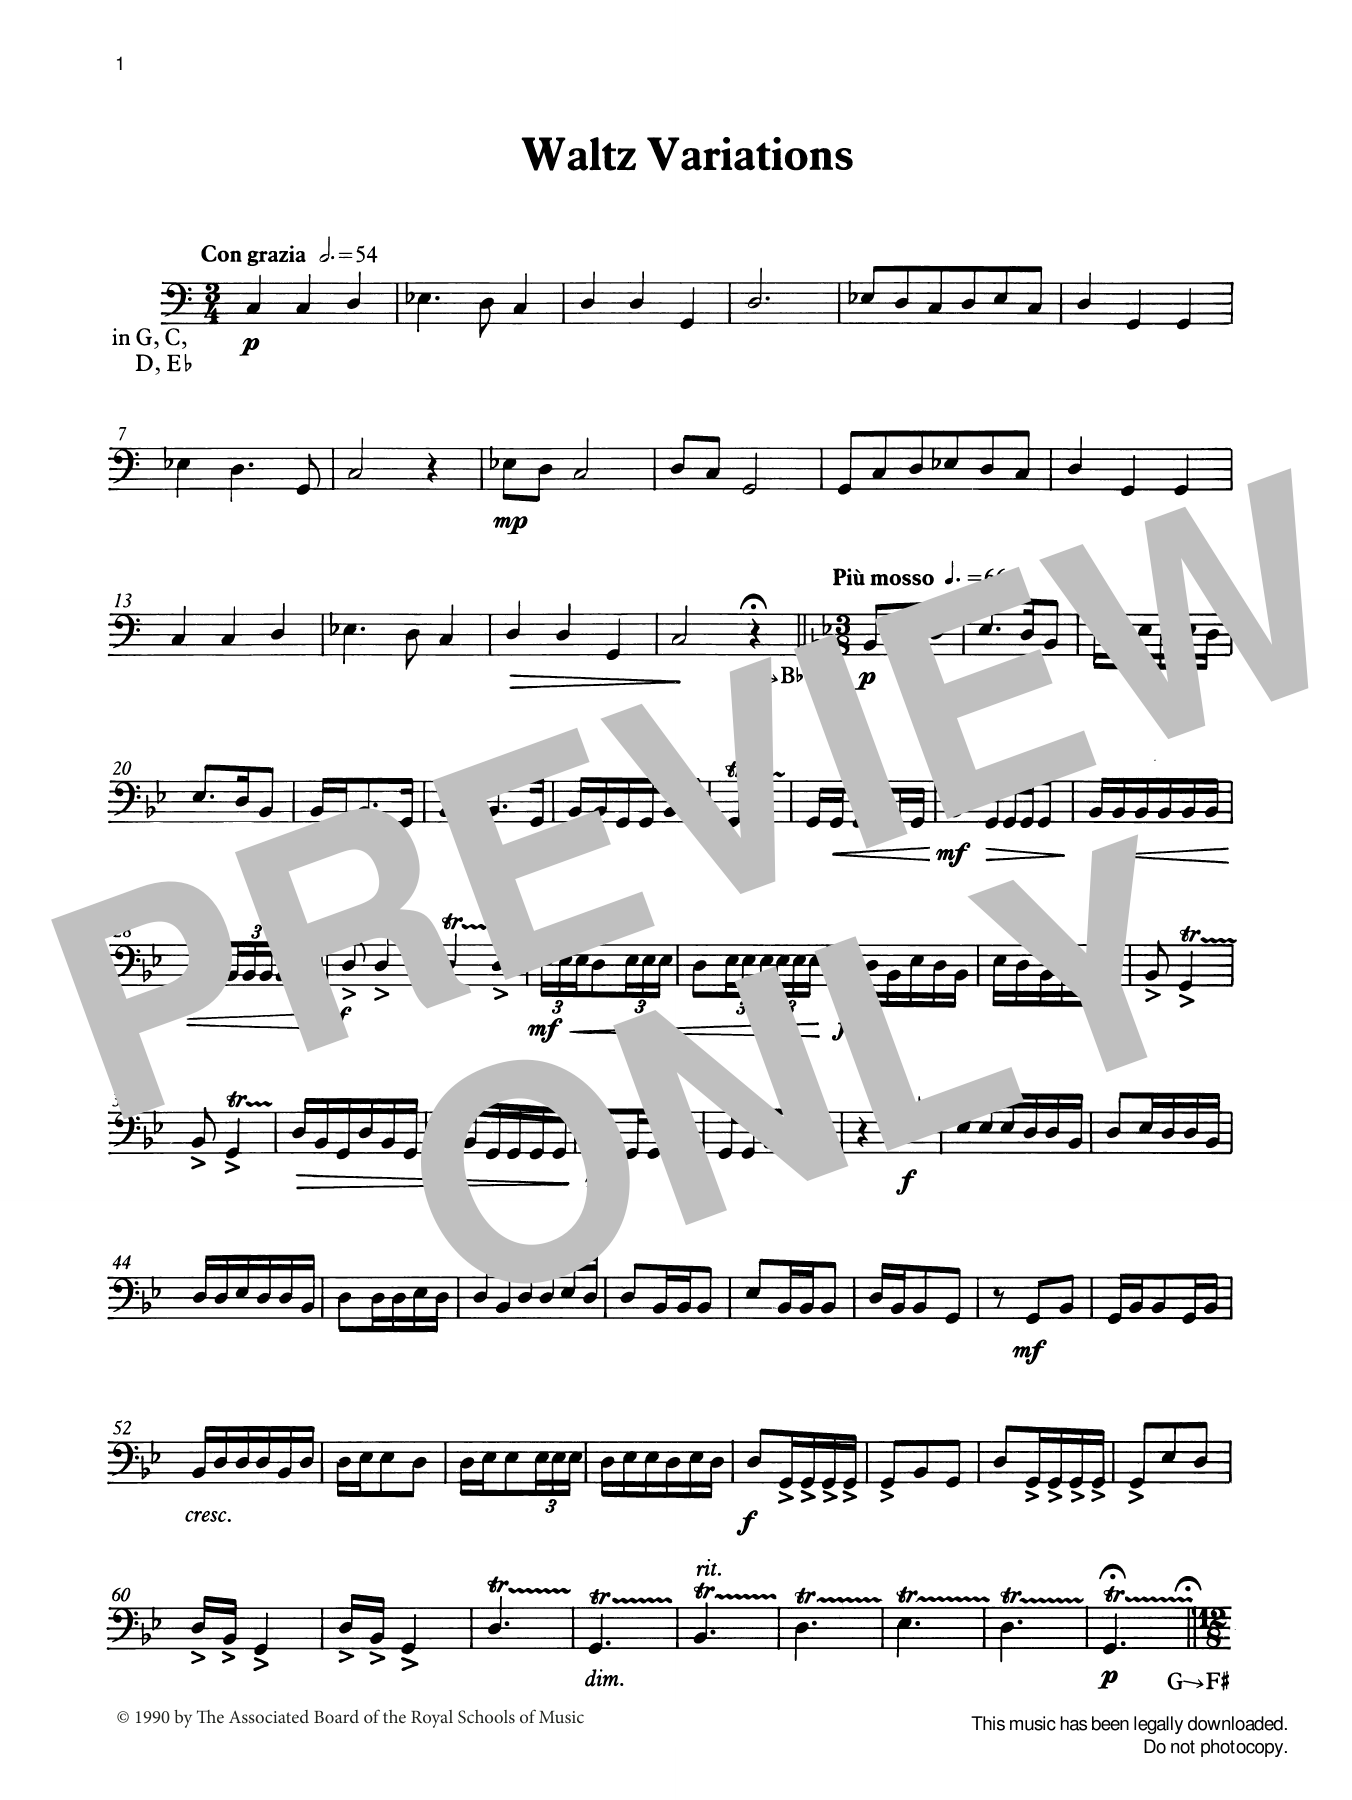 Download Ian Wright Waltz Variations from Graded Music for Sheet Music